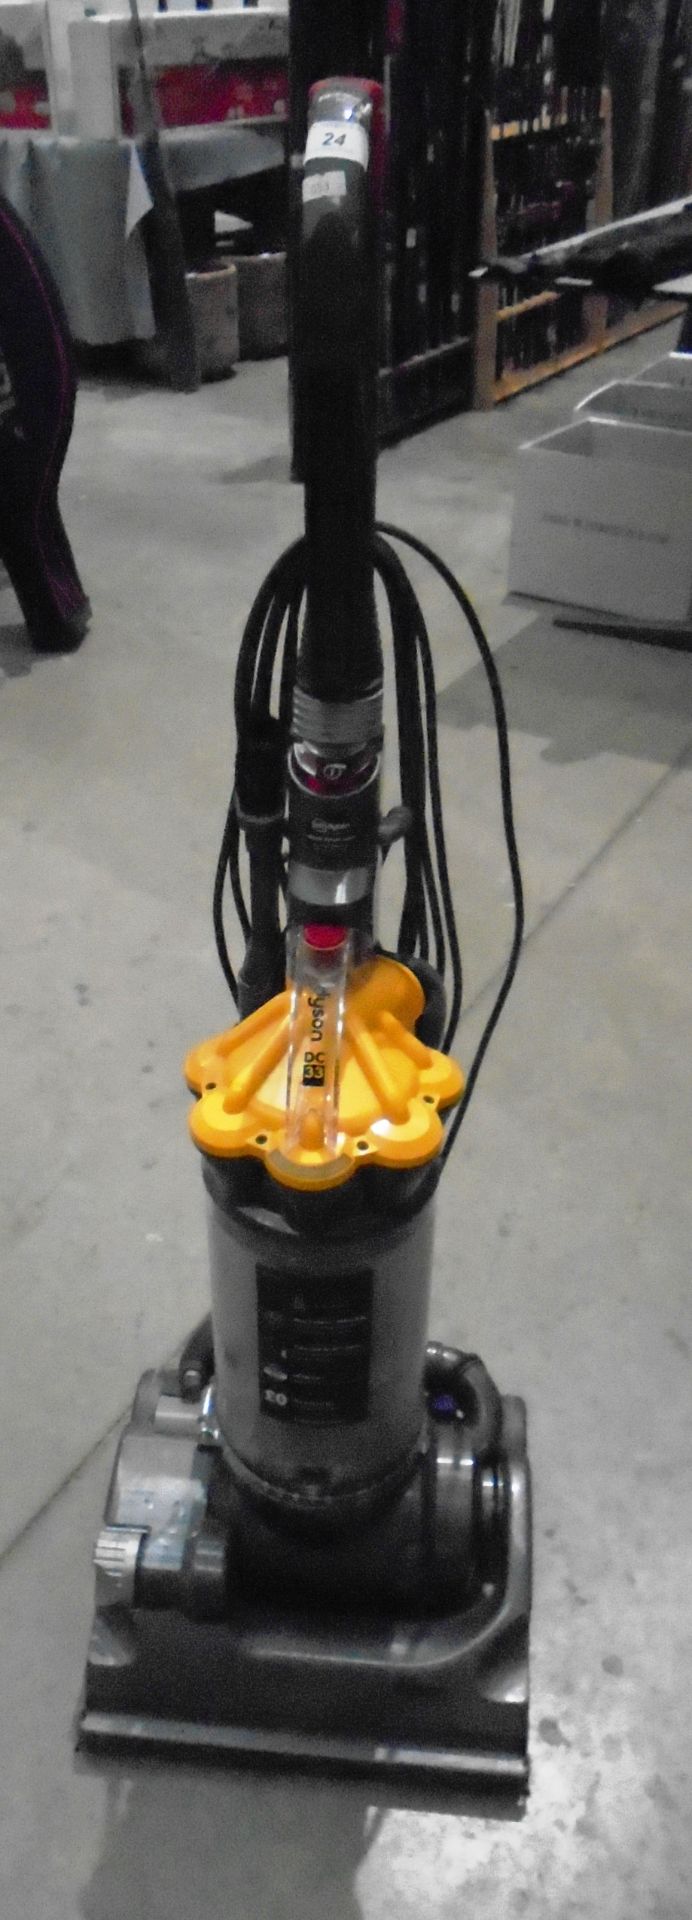 A Dyson DC33 vacuum cleaner